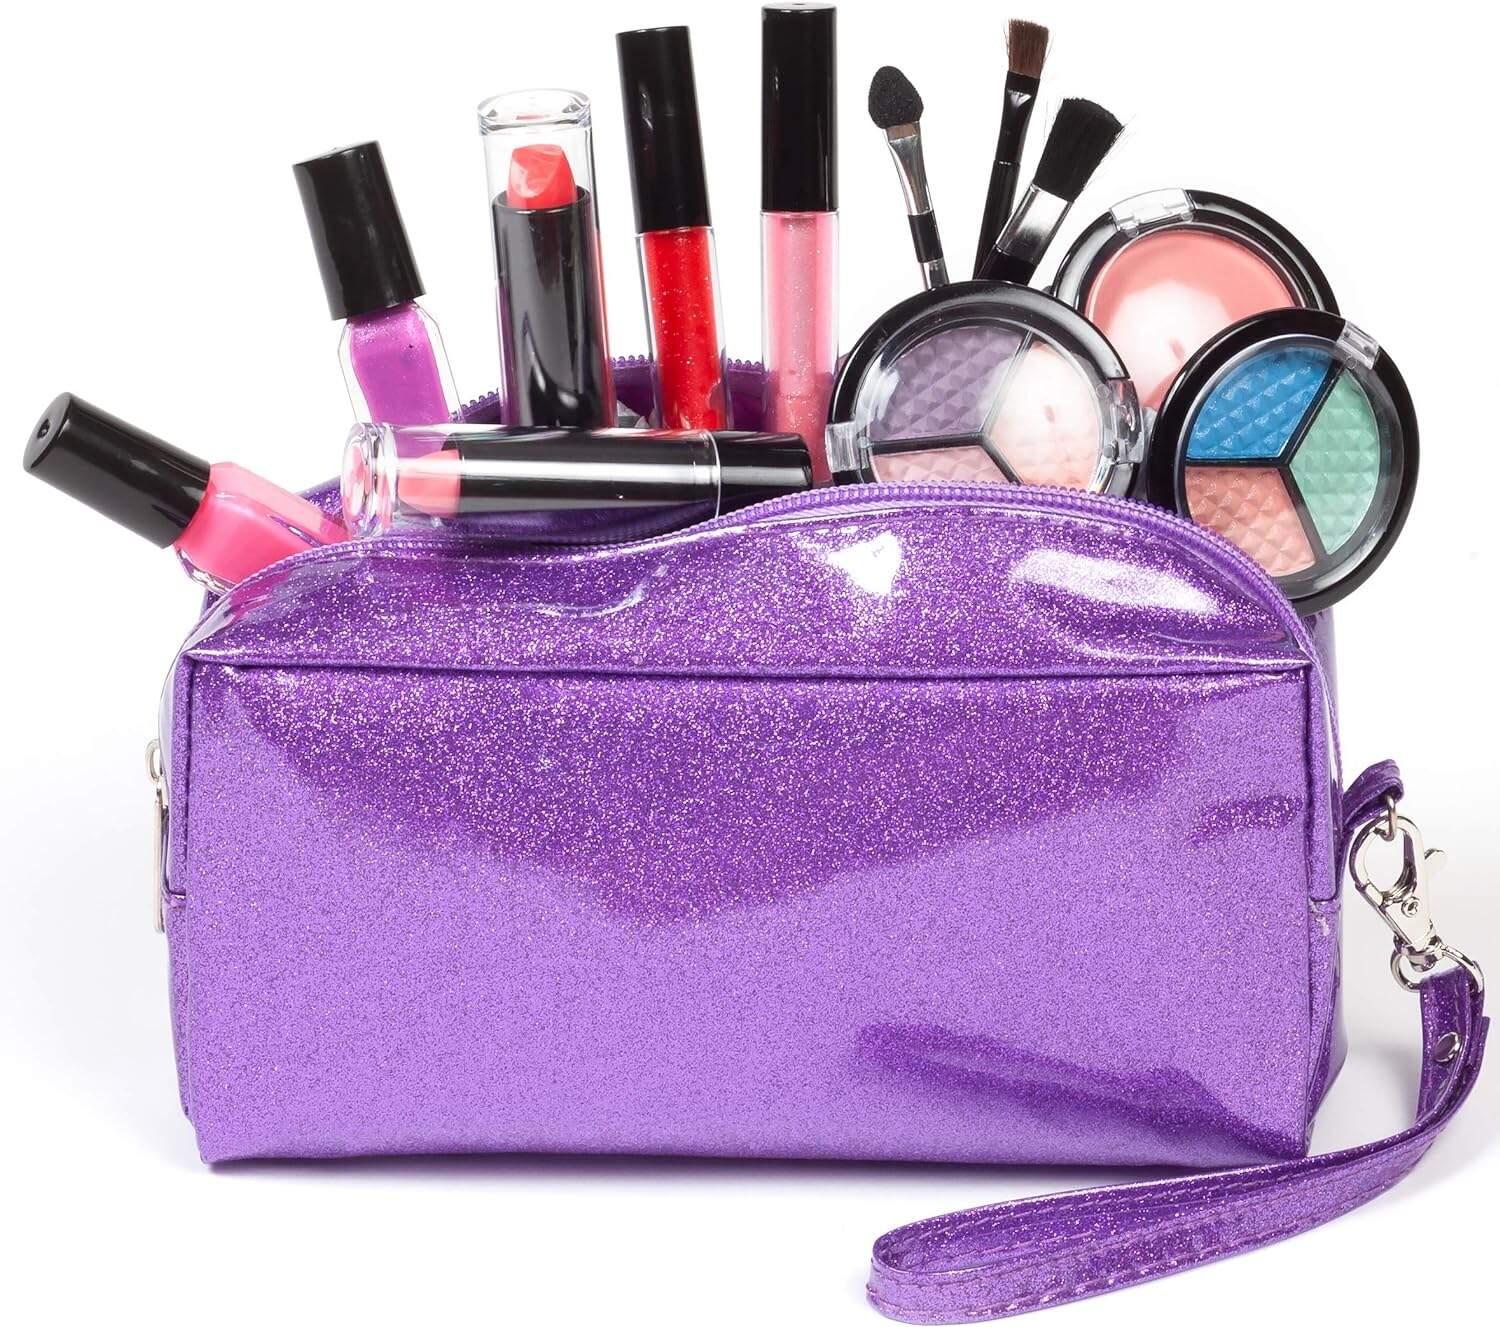 Playkidz My First Princess Washable Real Makeup Set with Designer Floral Cosmetic Bag